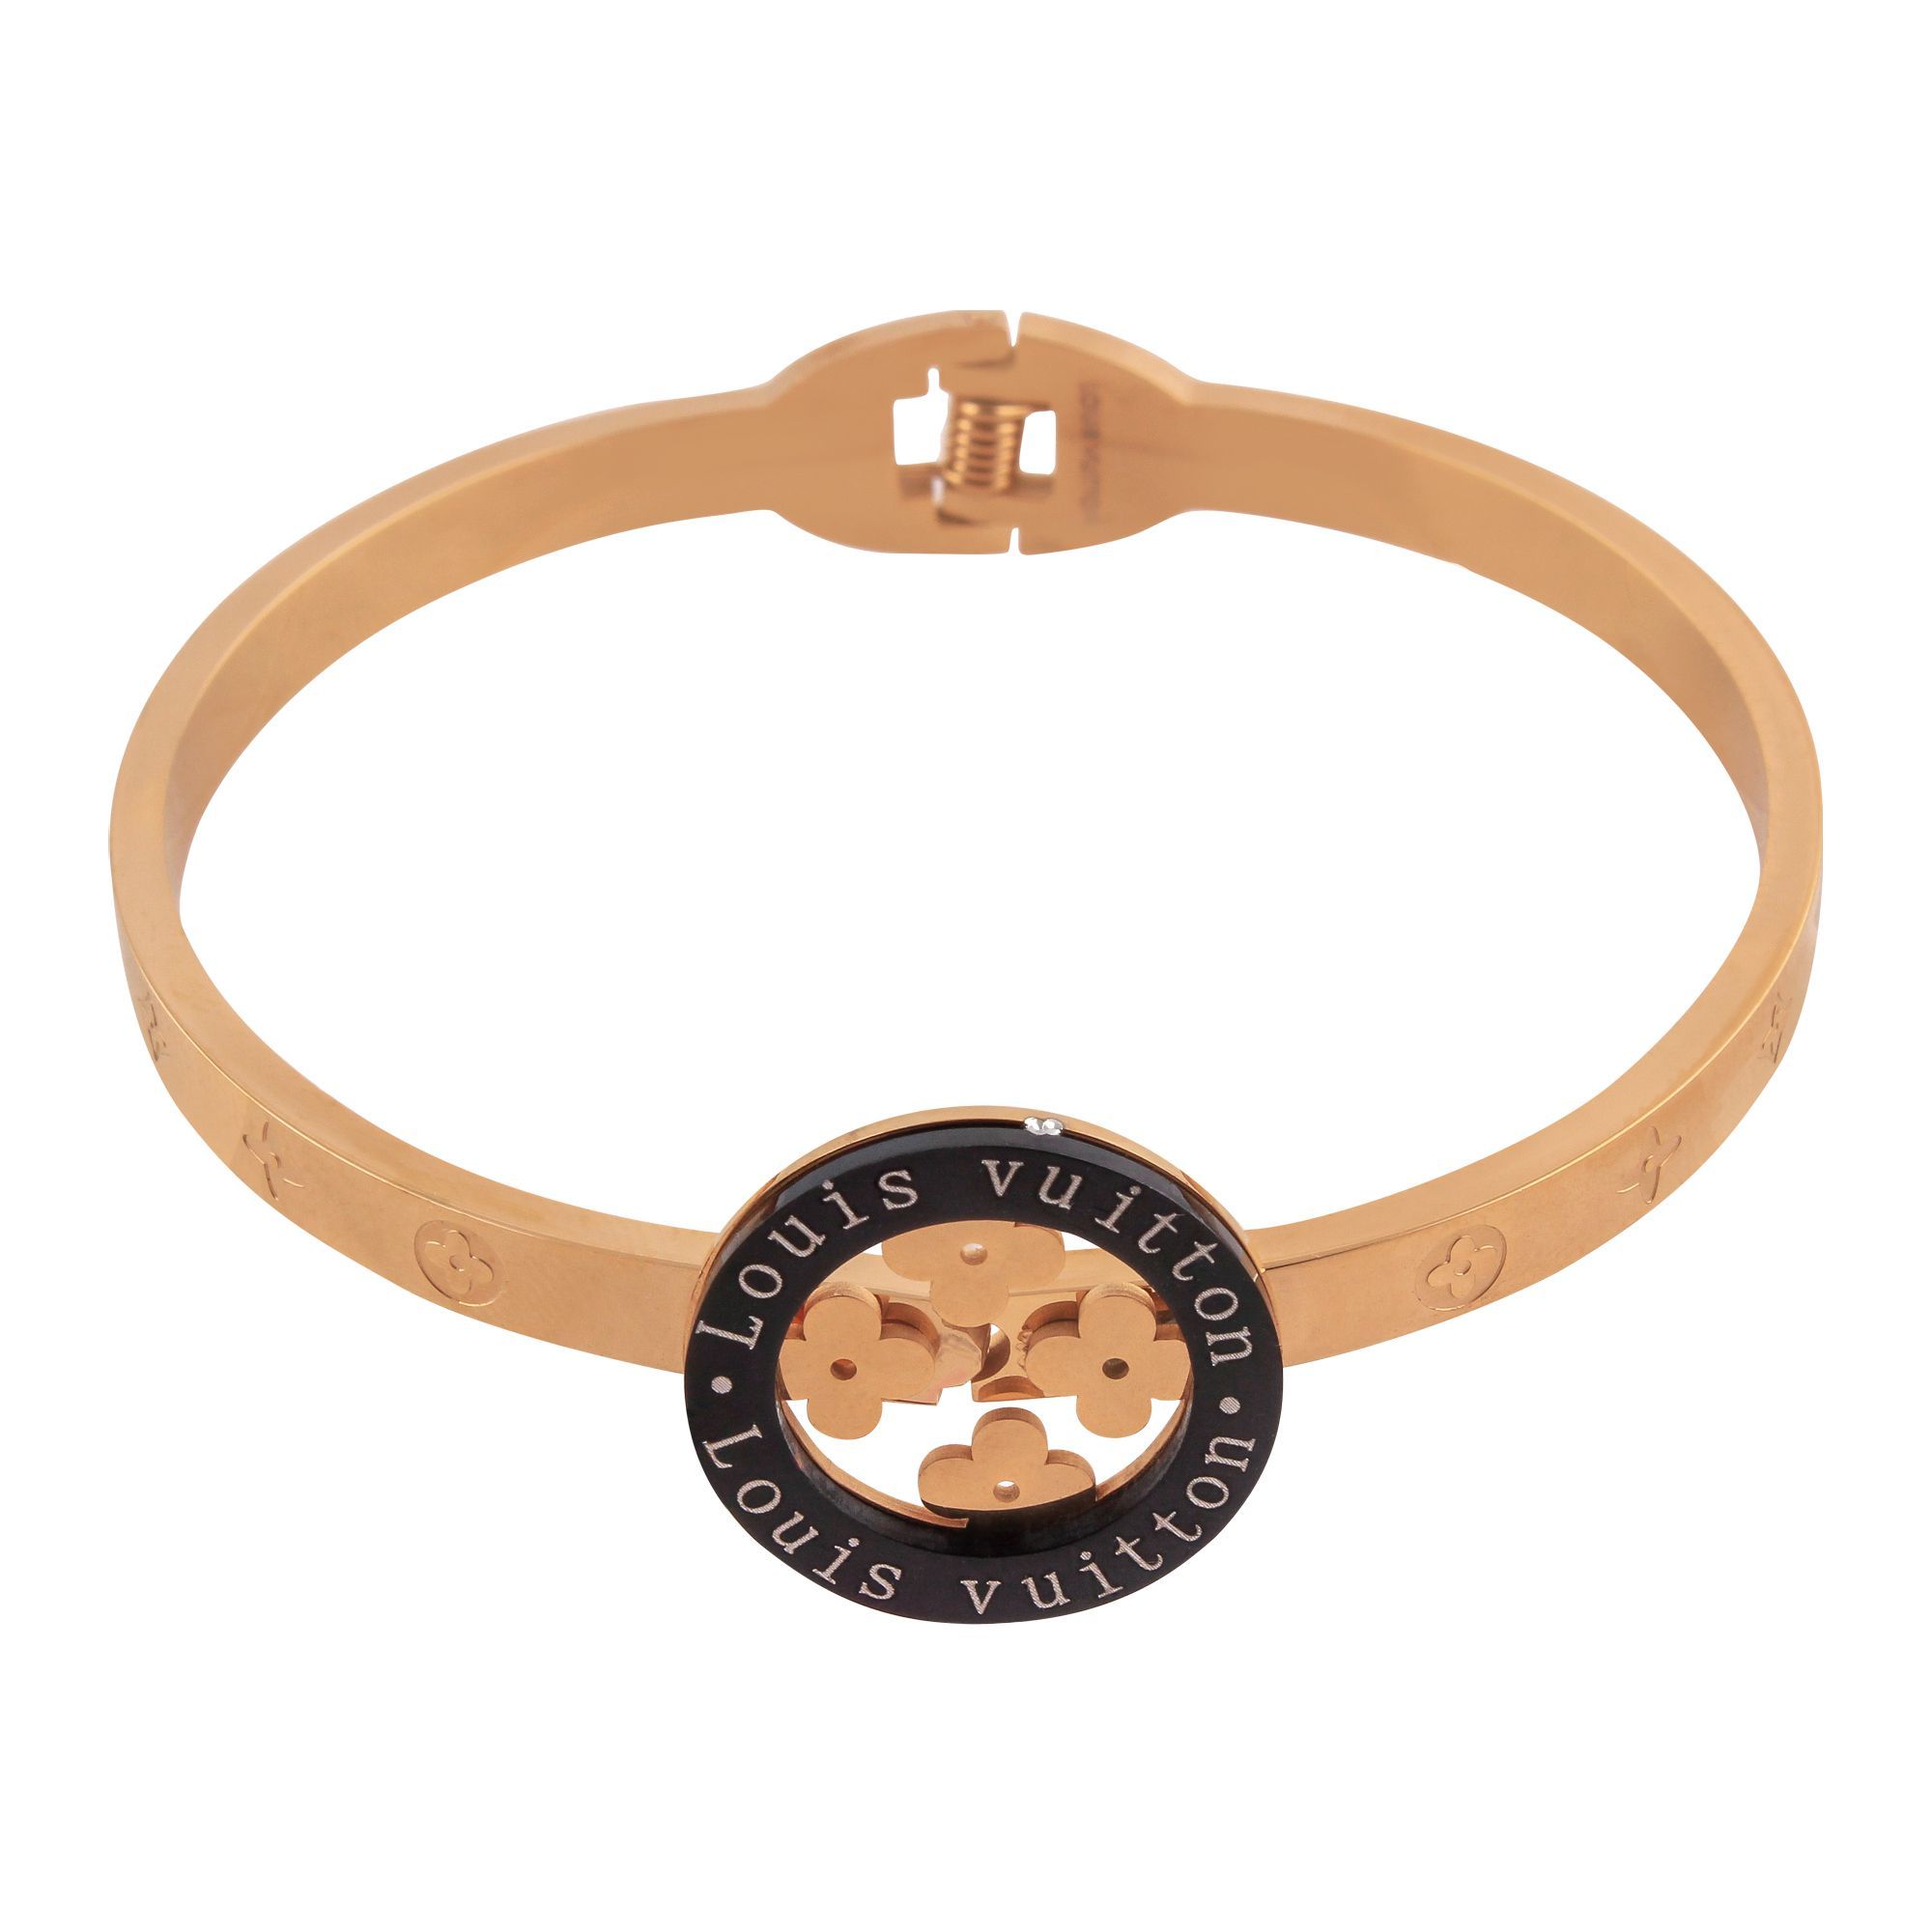 Buy LV Style Girls Bracelet, Rose Gold, NS-0165 Online at Special Price in Pakistan - www.semashow.com